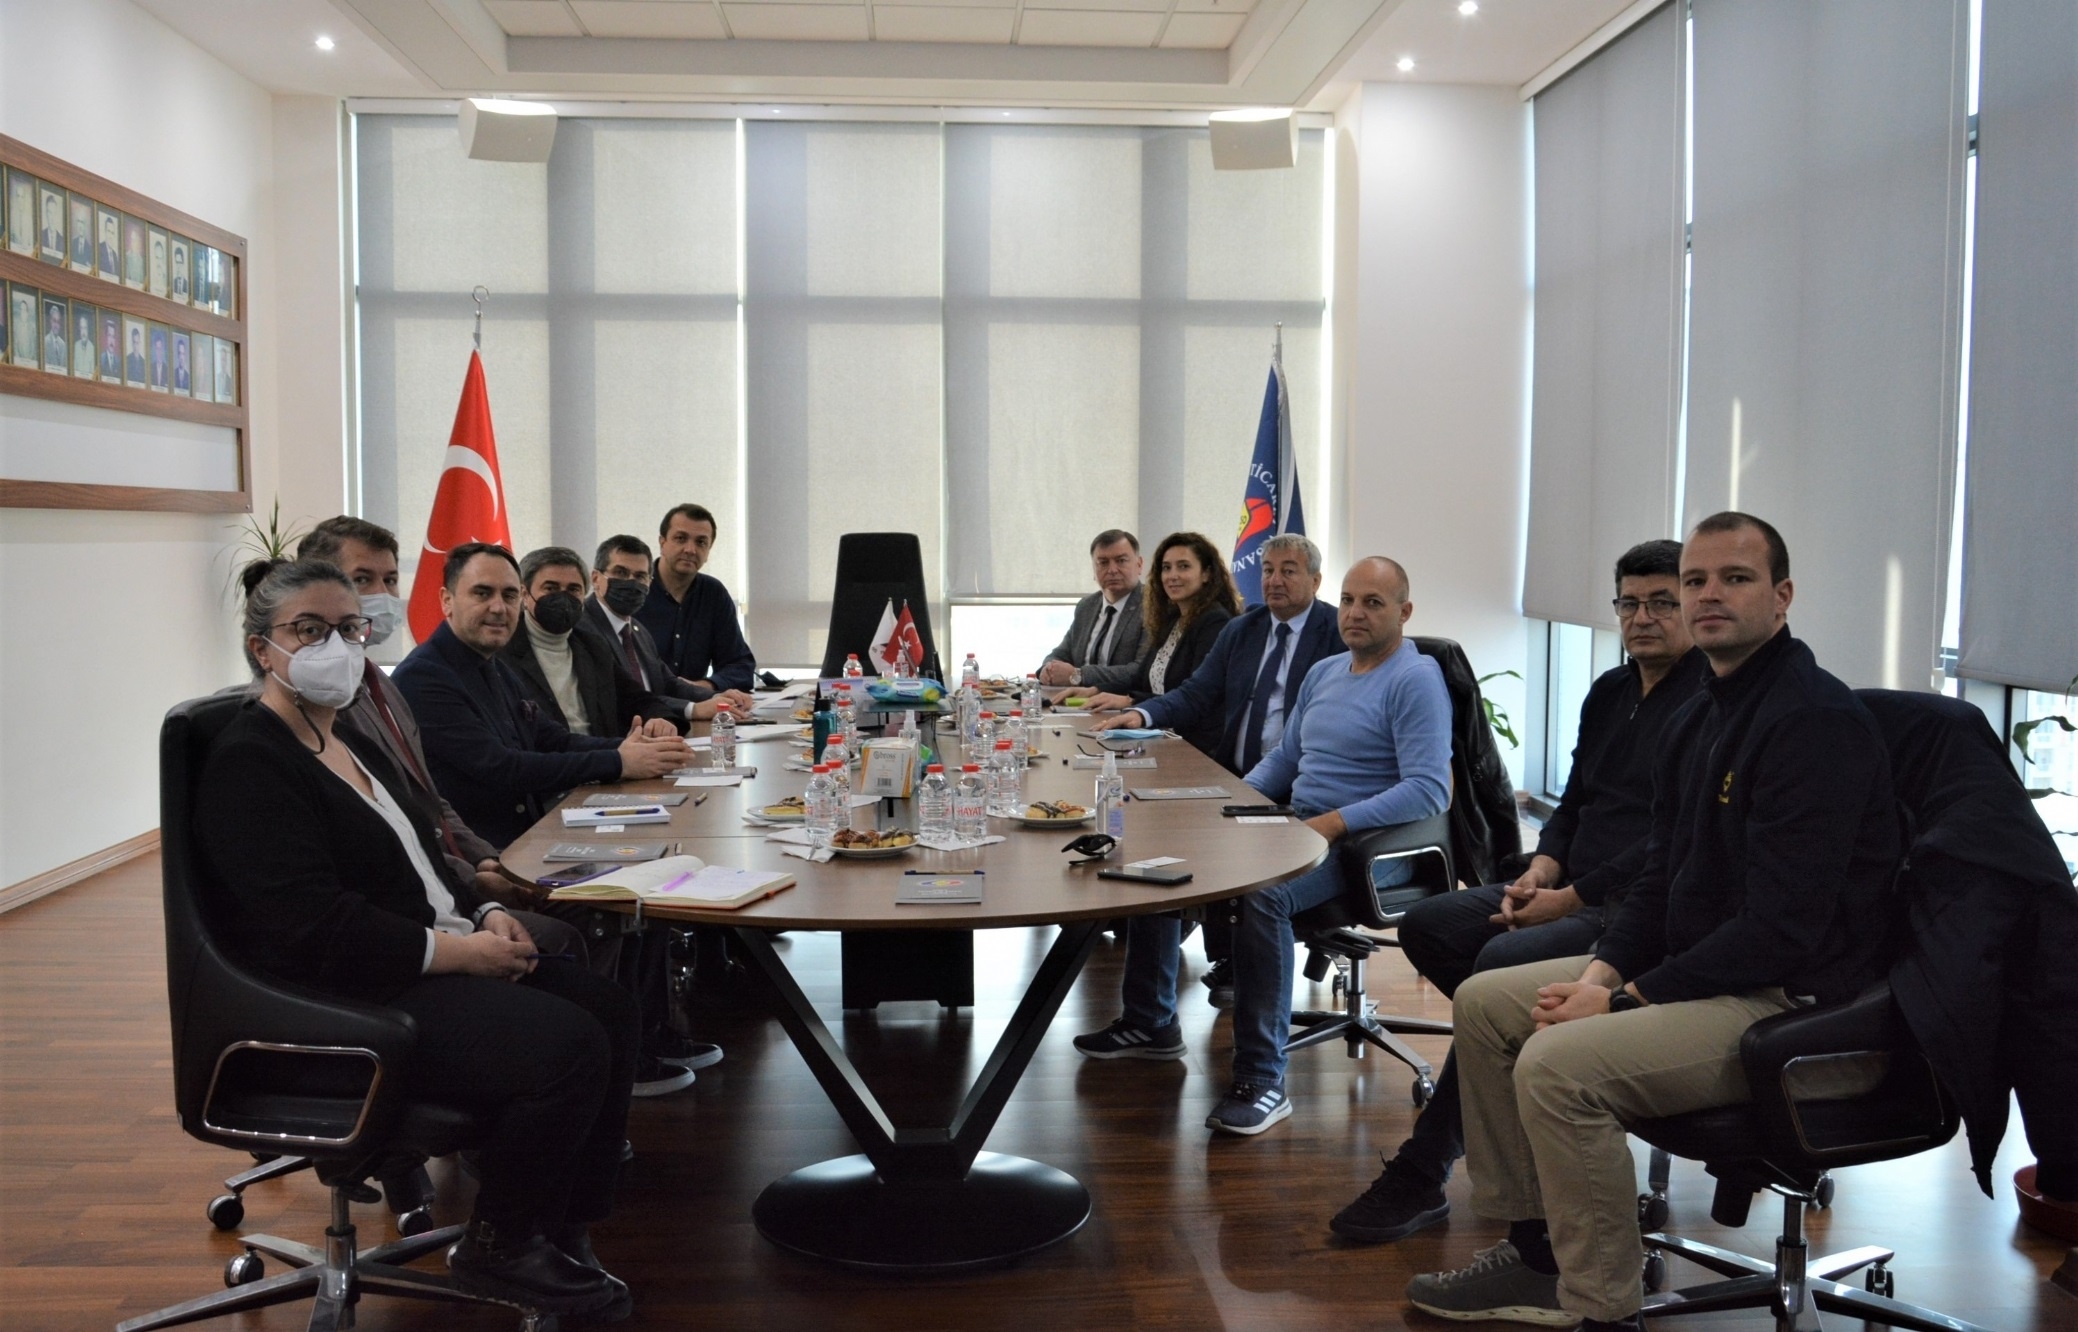 Bulgarian Business World Representatives Visited Our Chamber